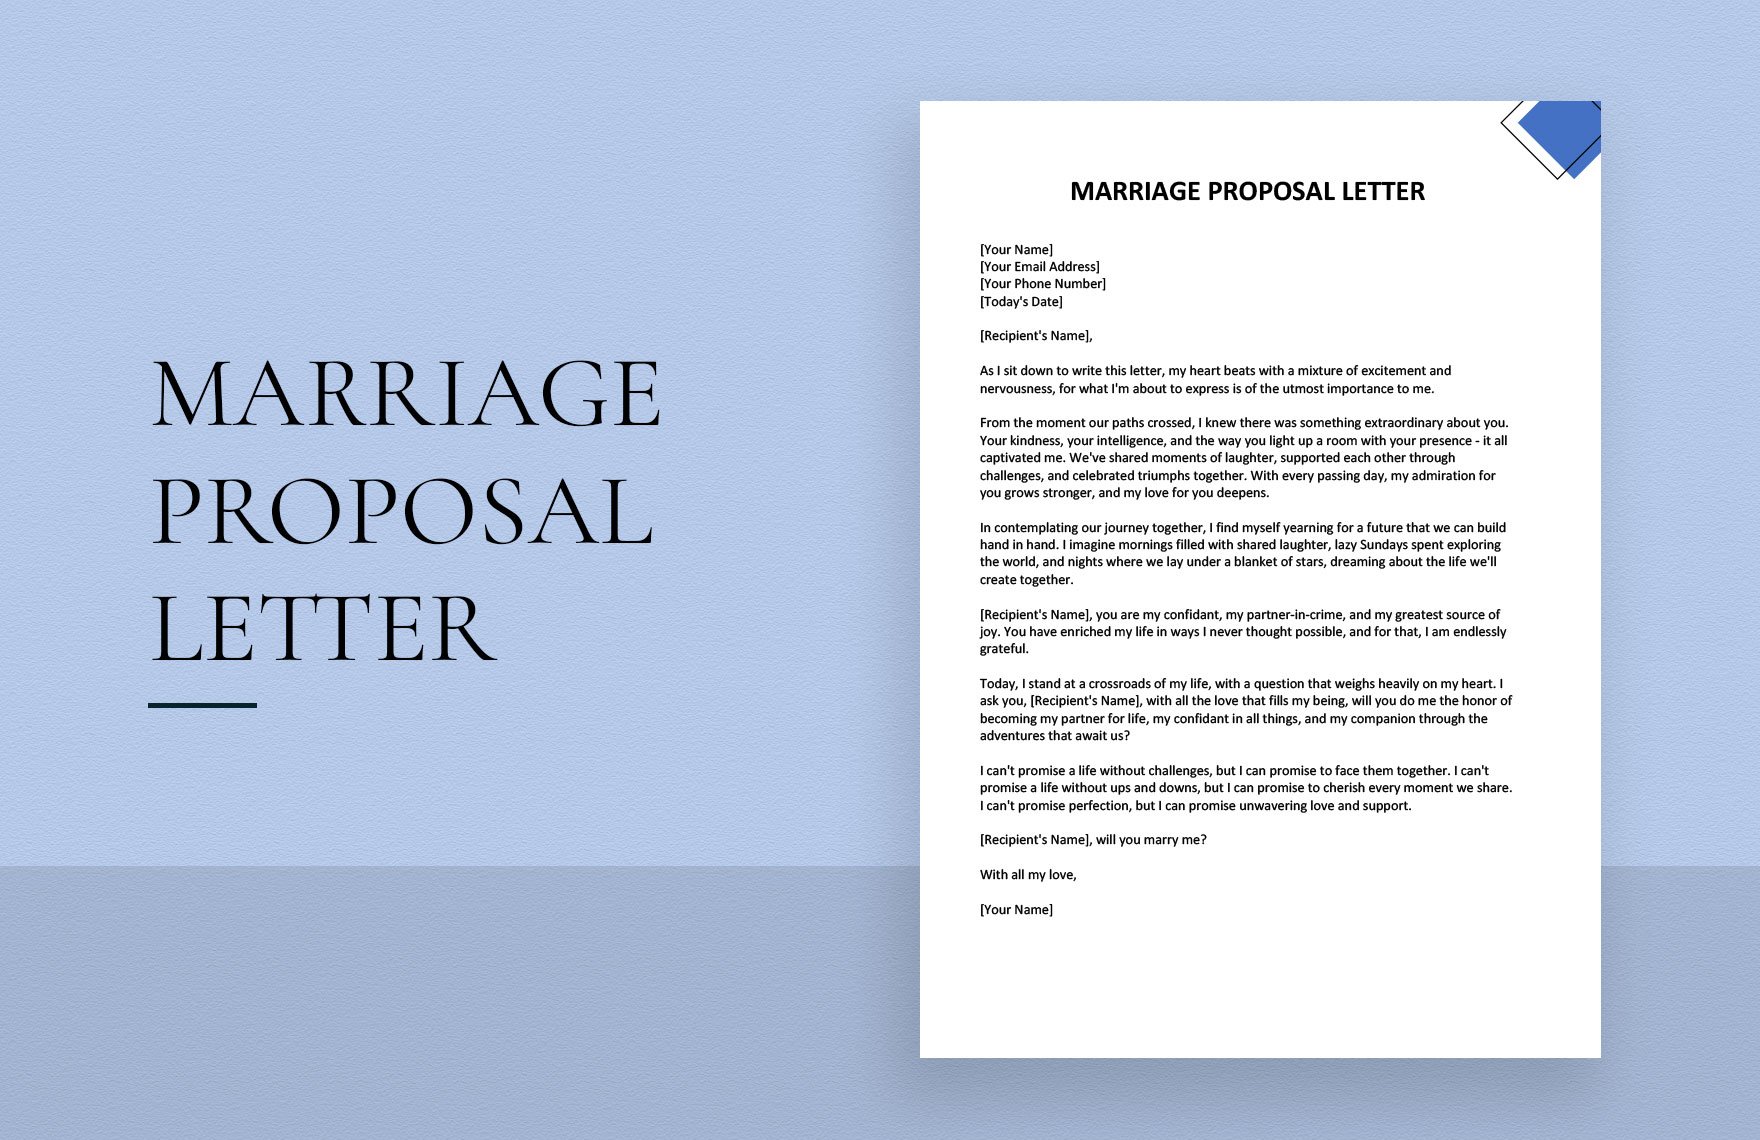 Marriage Proposal Letter